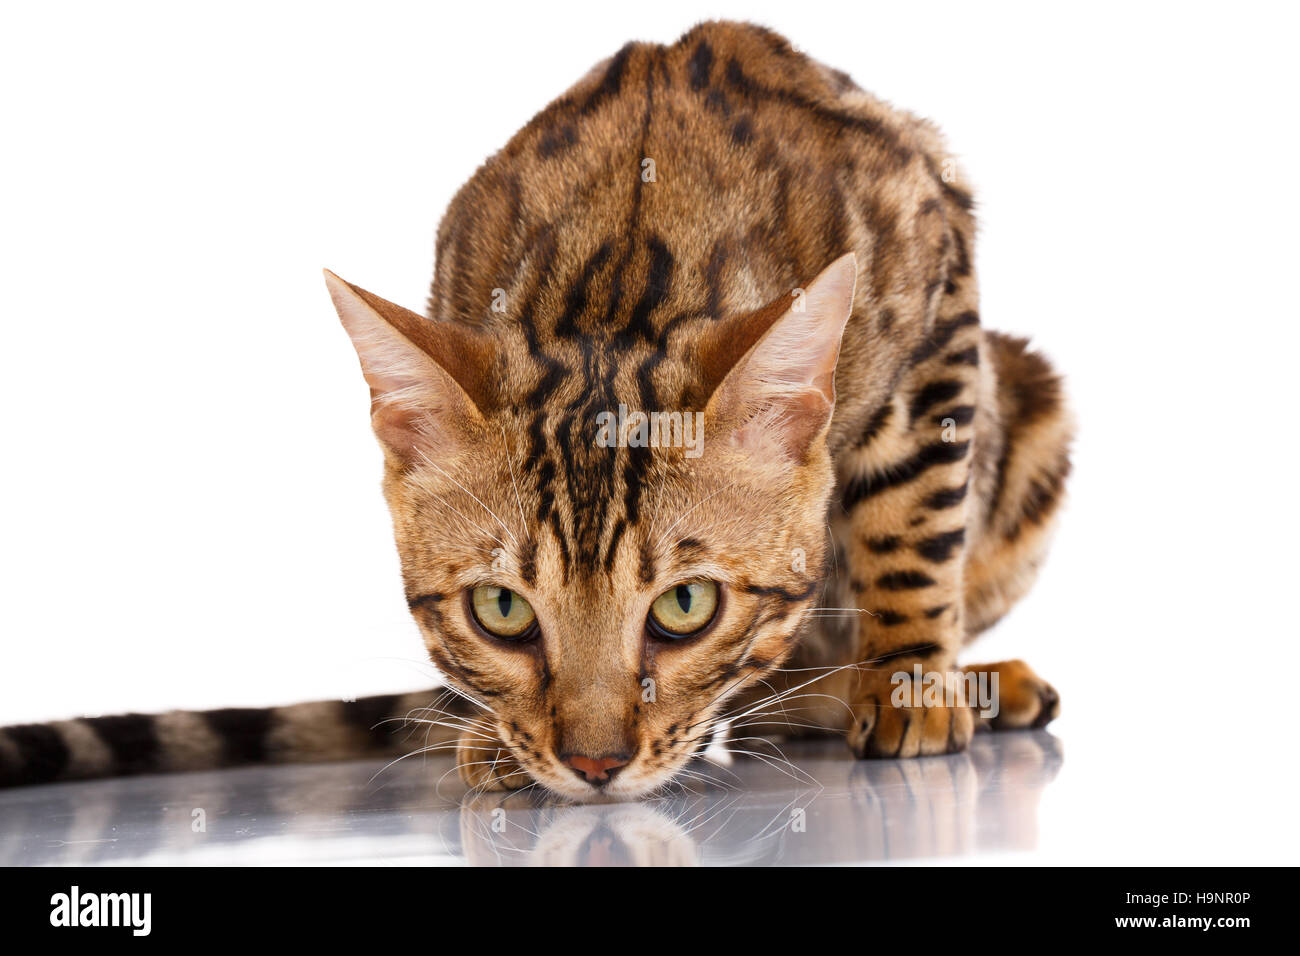 Cats Bengal breed Stock Photo